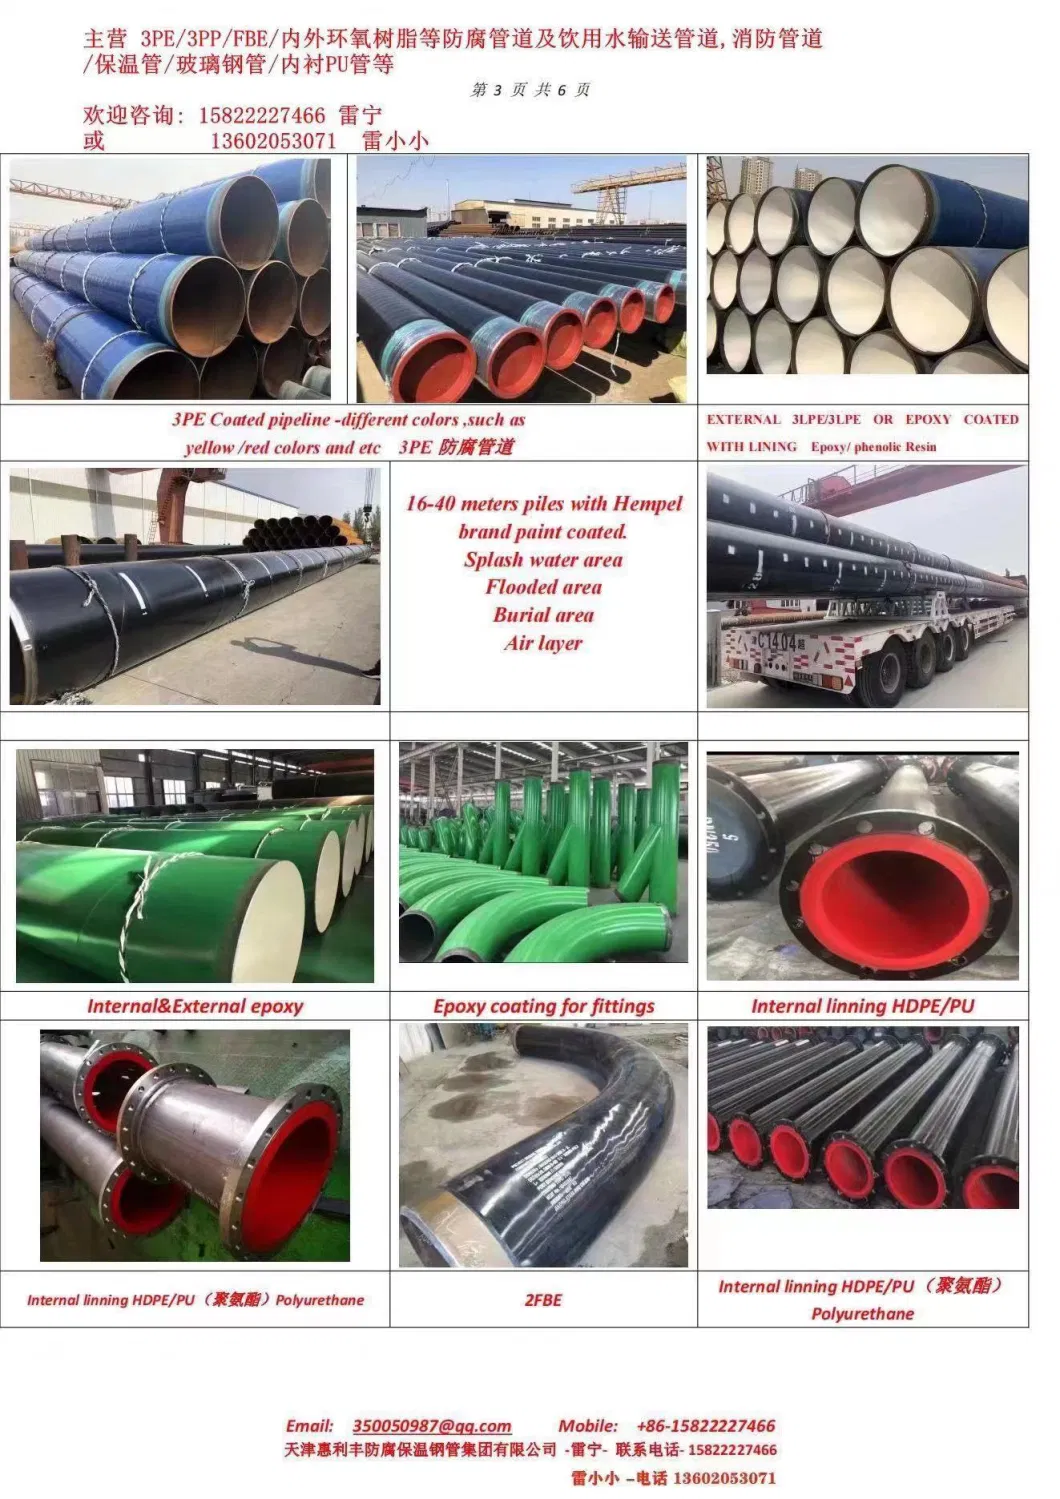 Carbon Steel Pipes with HDPE Coatings